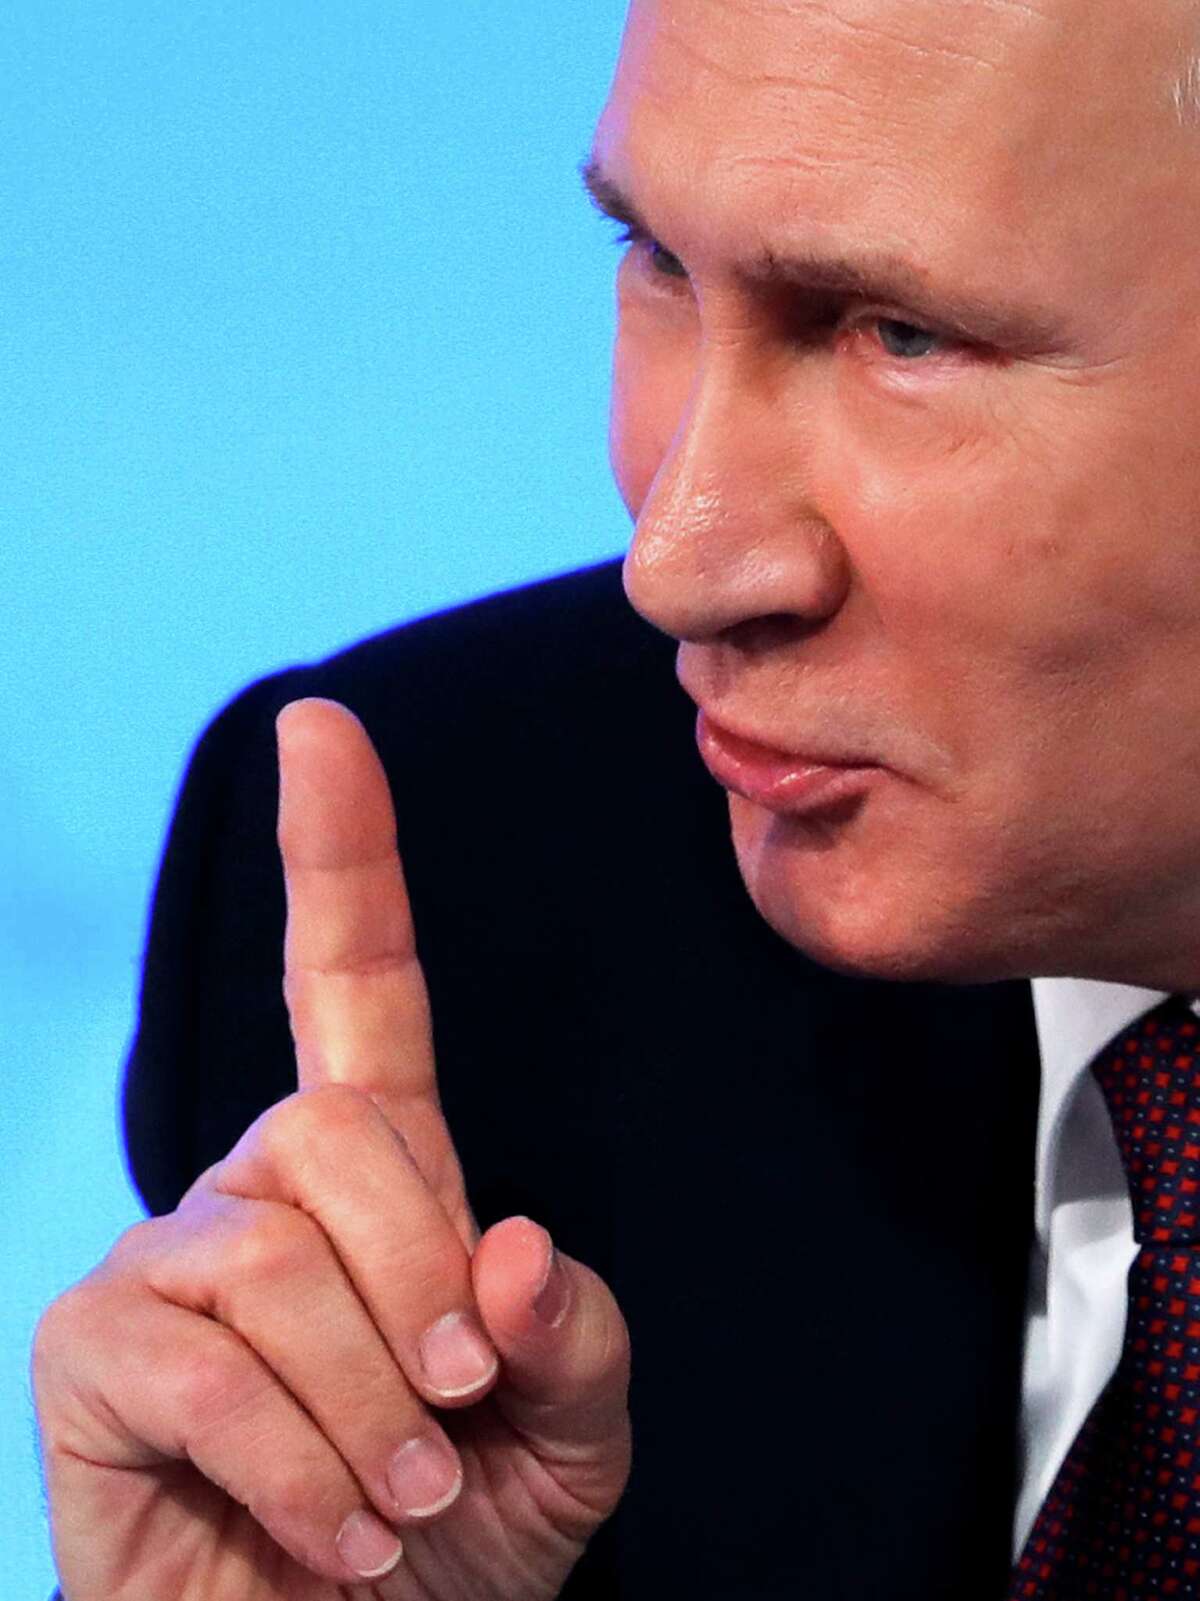 Russian President Vladimir Putin gestures while speaking during his annual news conference in Moscow, Russia, Friday, Dec. 23, 2016. (AP Photo/Pavel Golovkin)